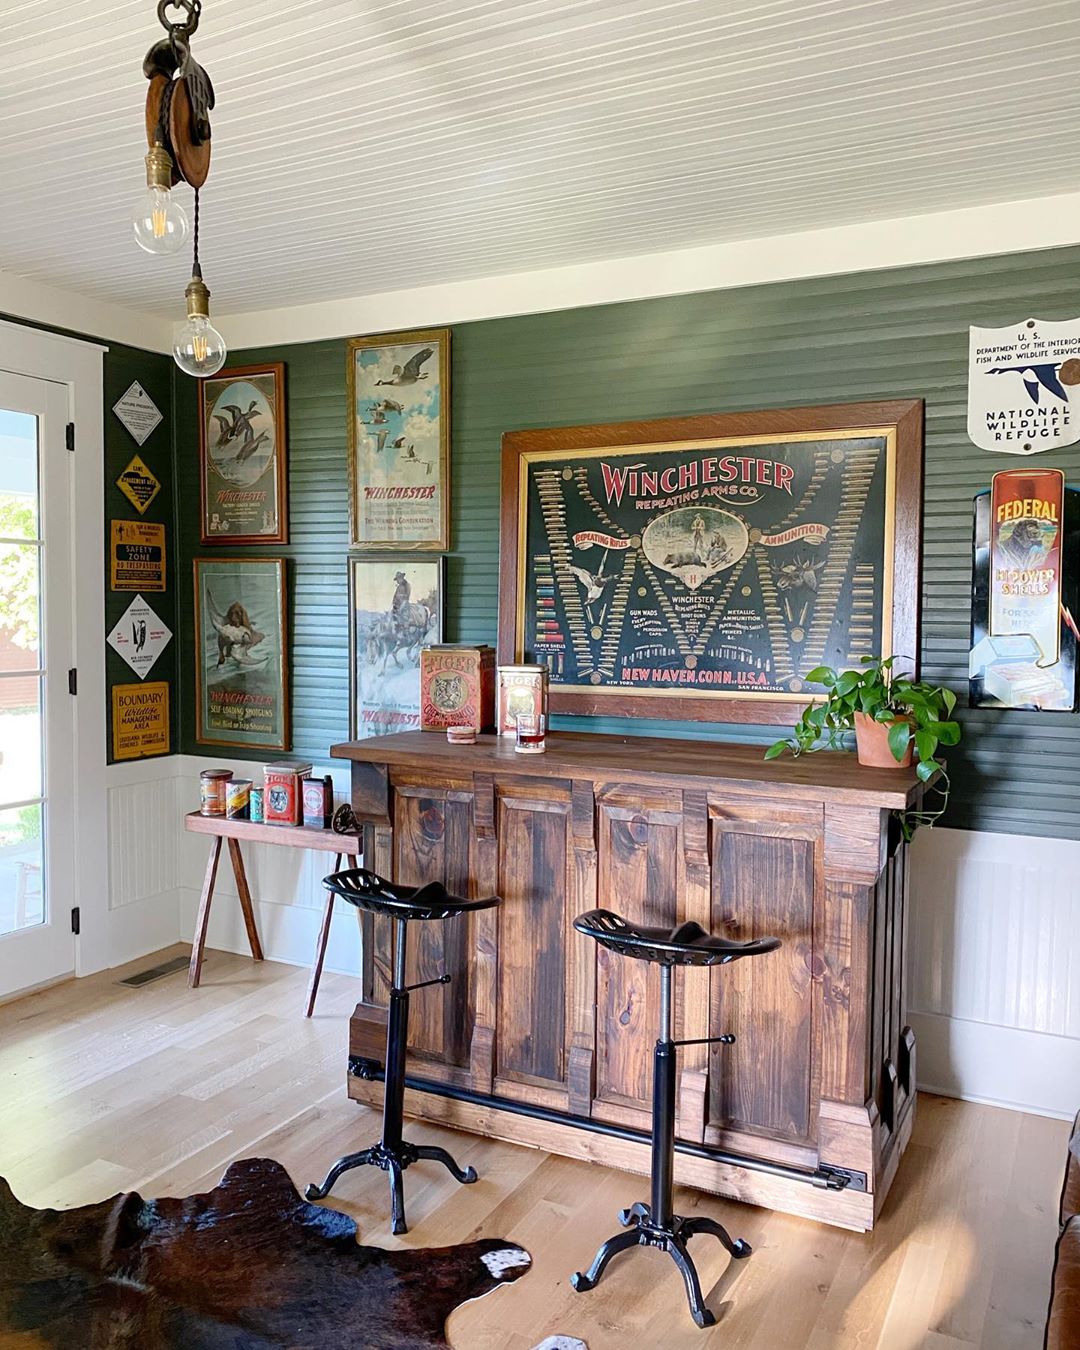 Simple Farmhouse Bar Look in an Outdoor Shed. Photo by Instagram user @farmhouse4010